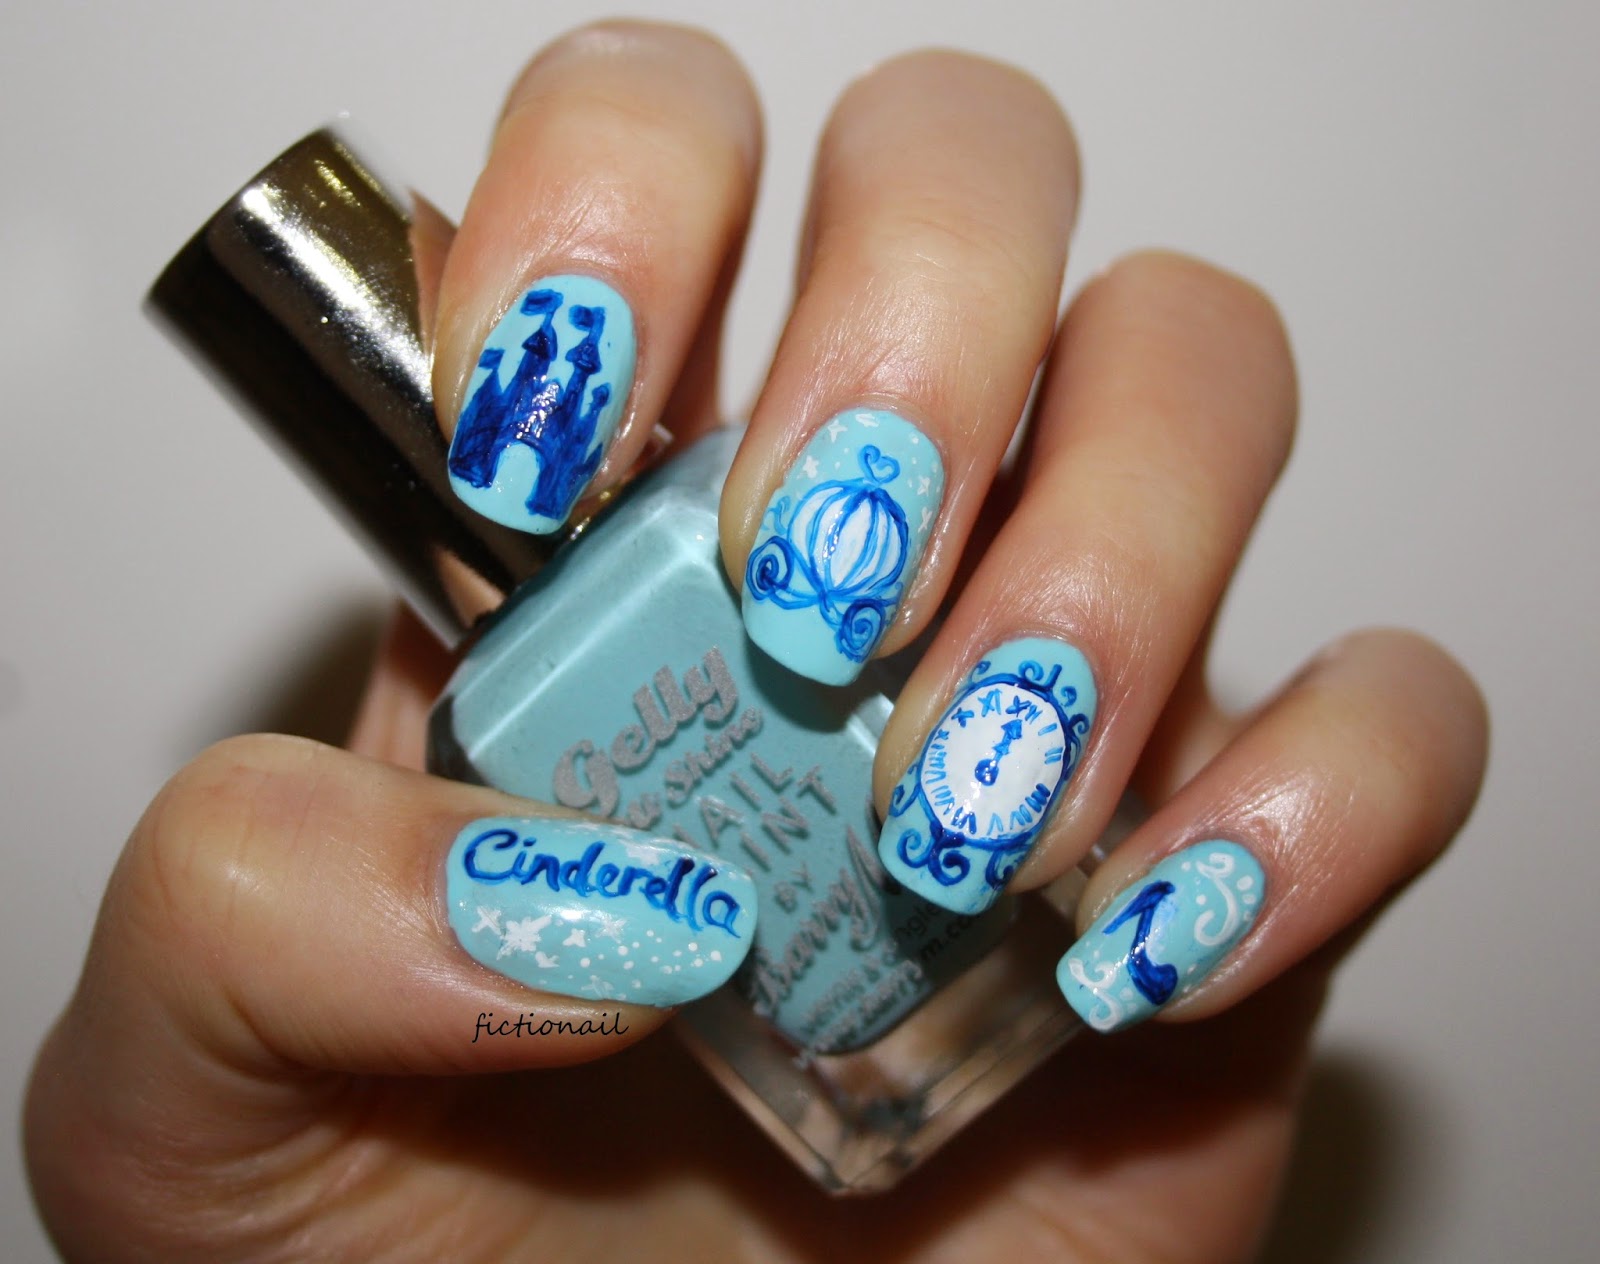 4. Amplaz Mall's top nail art designs inspired by Cinderella - wide 3